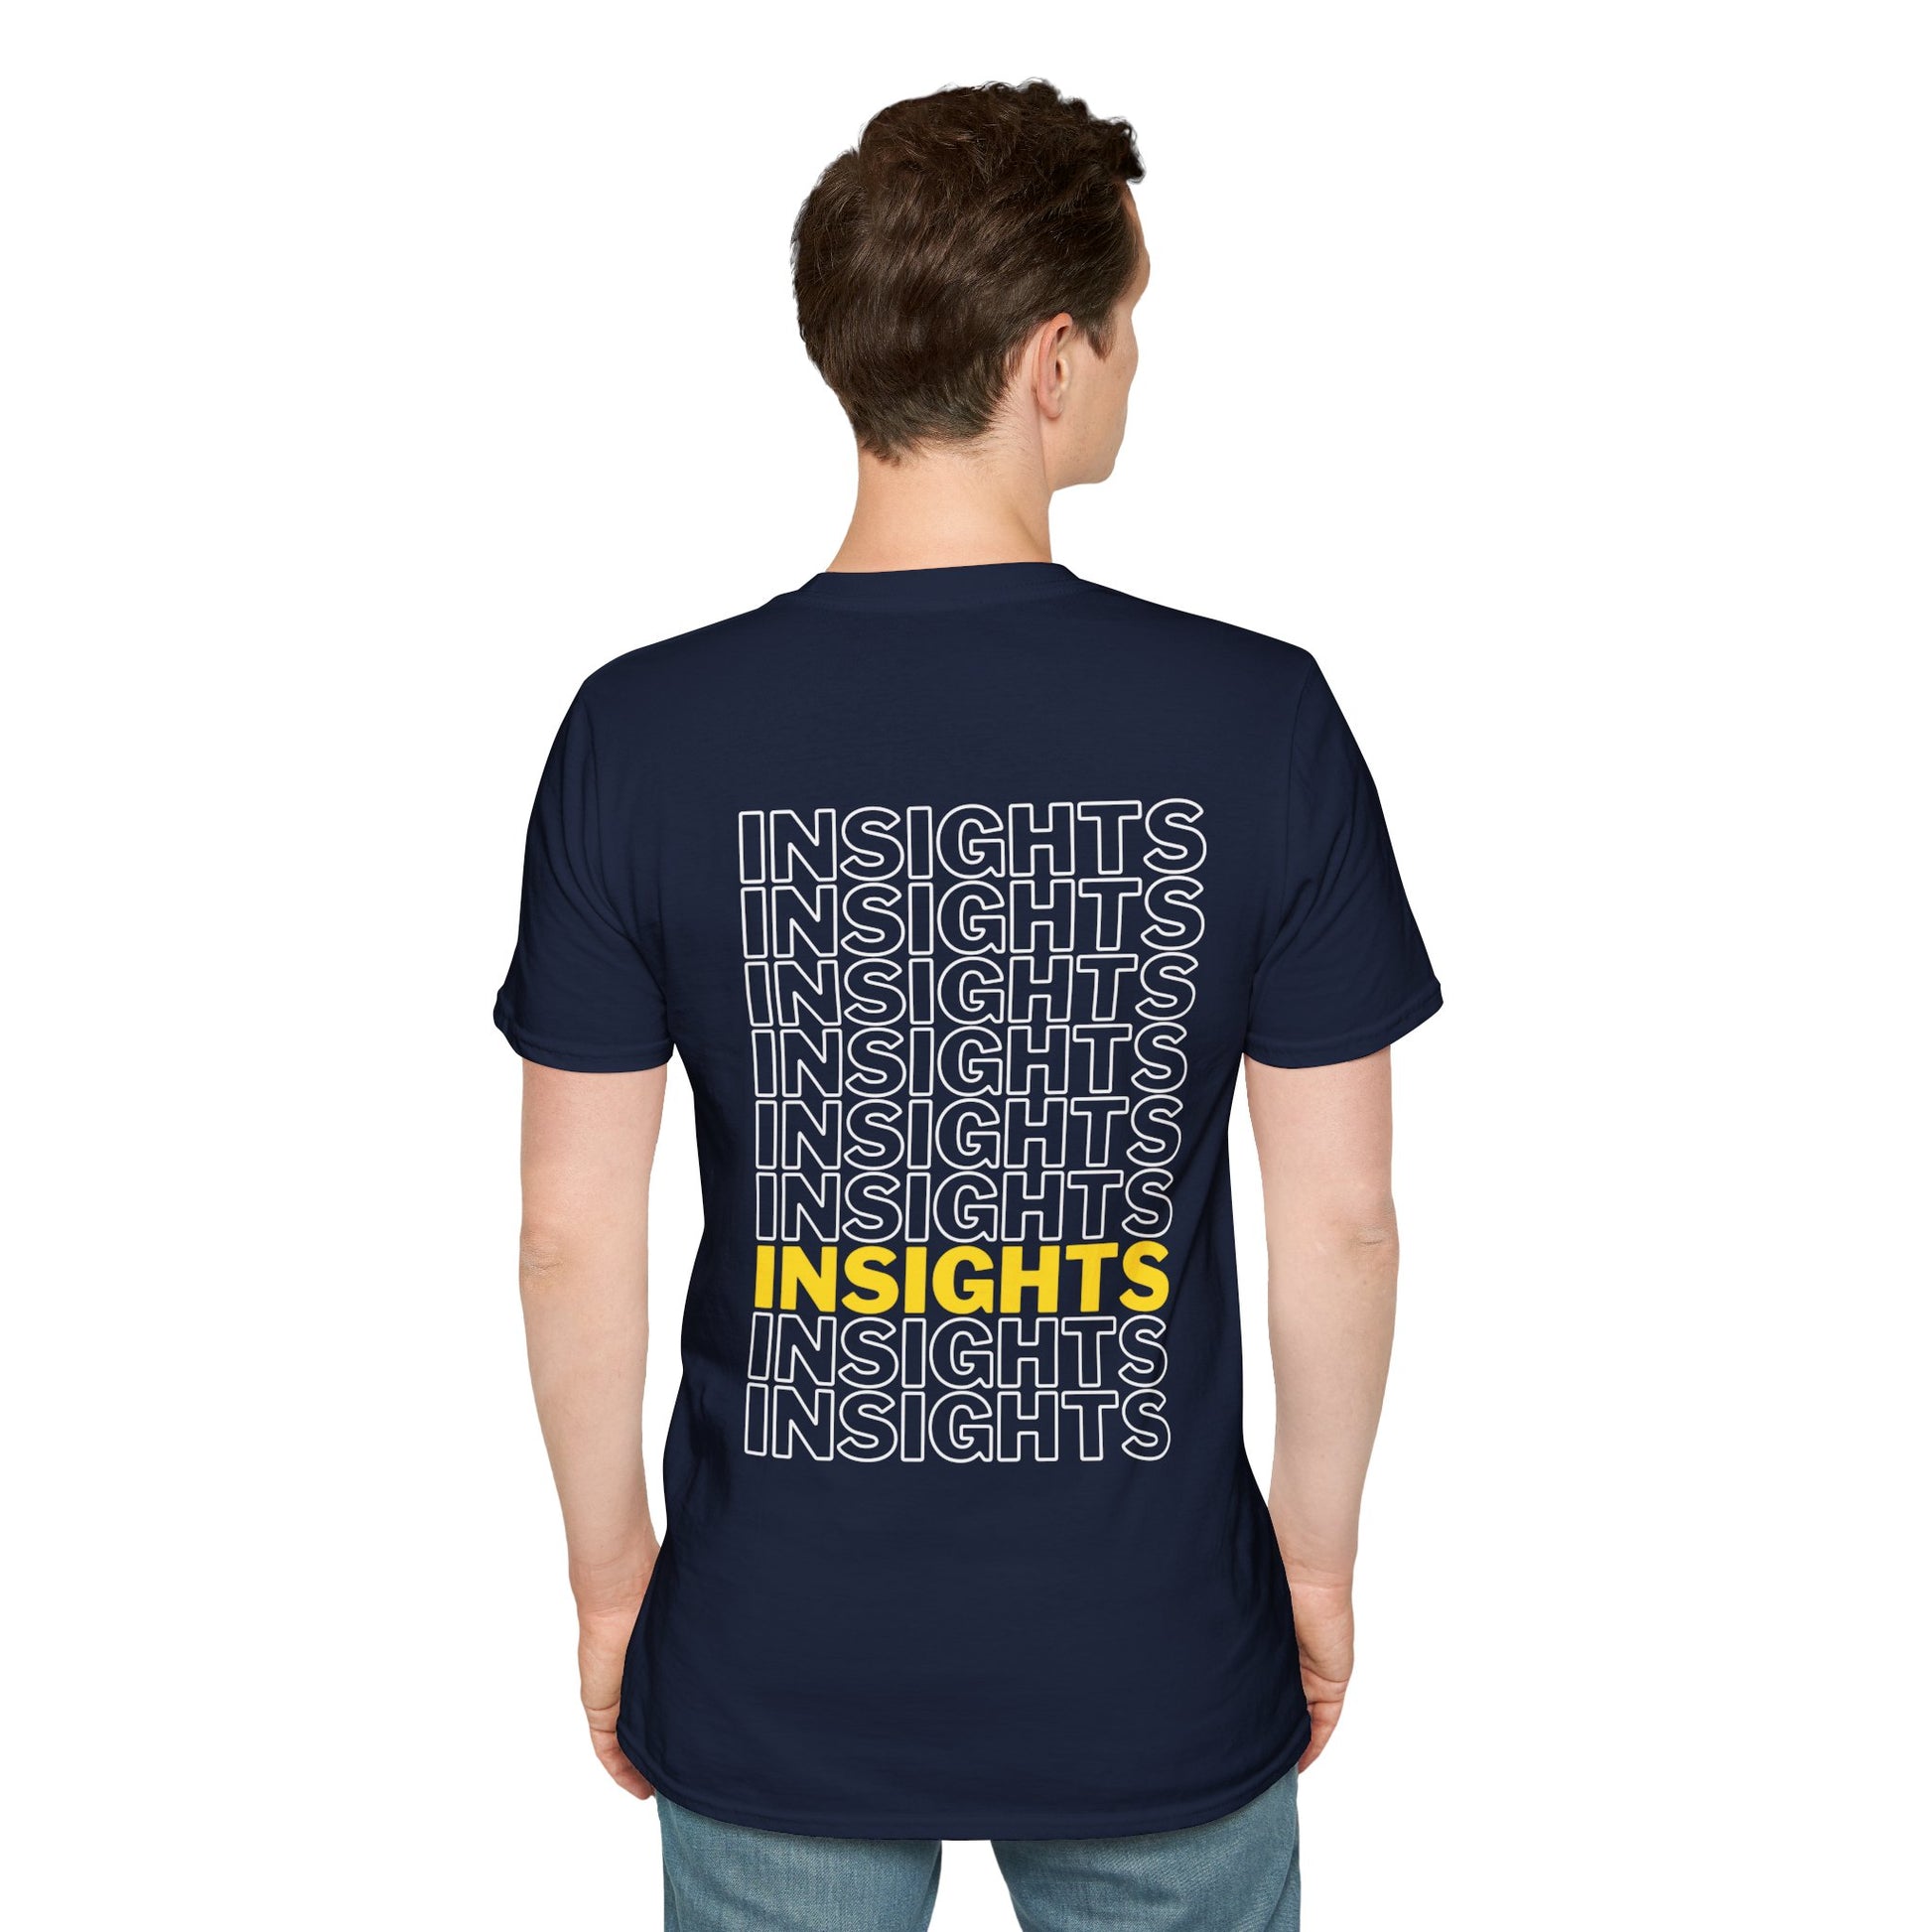 Navy T-shirt with the word ‘INSIGHTS’ repeated in white text and one instance highlighted in yellow